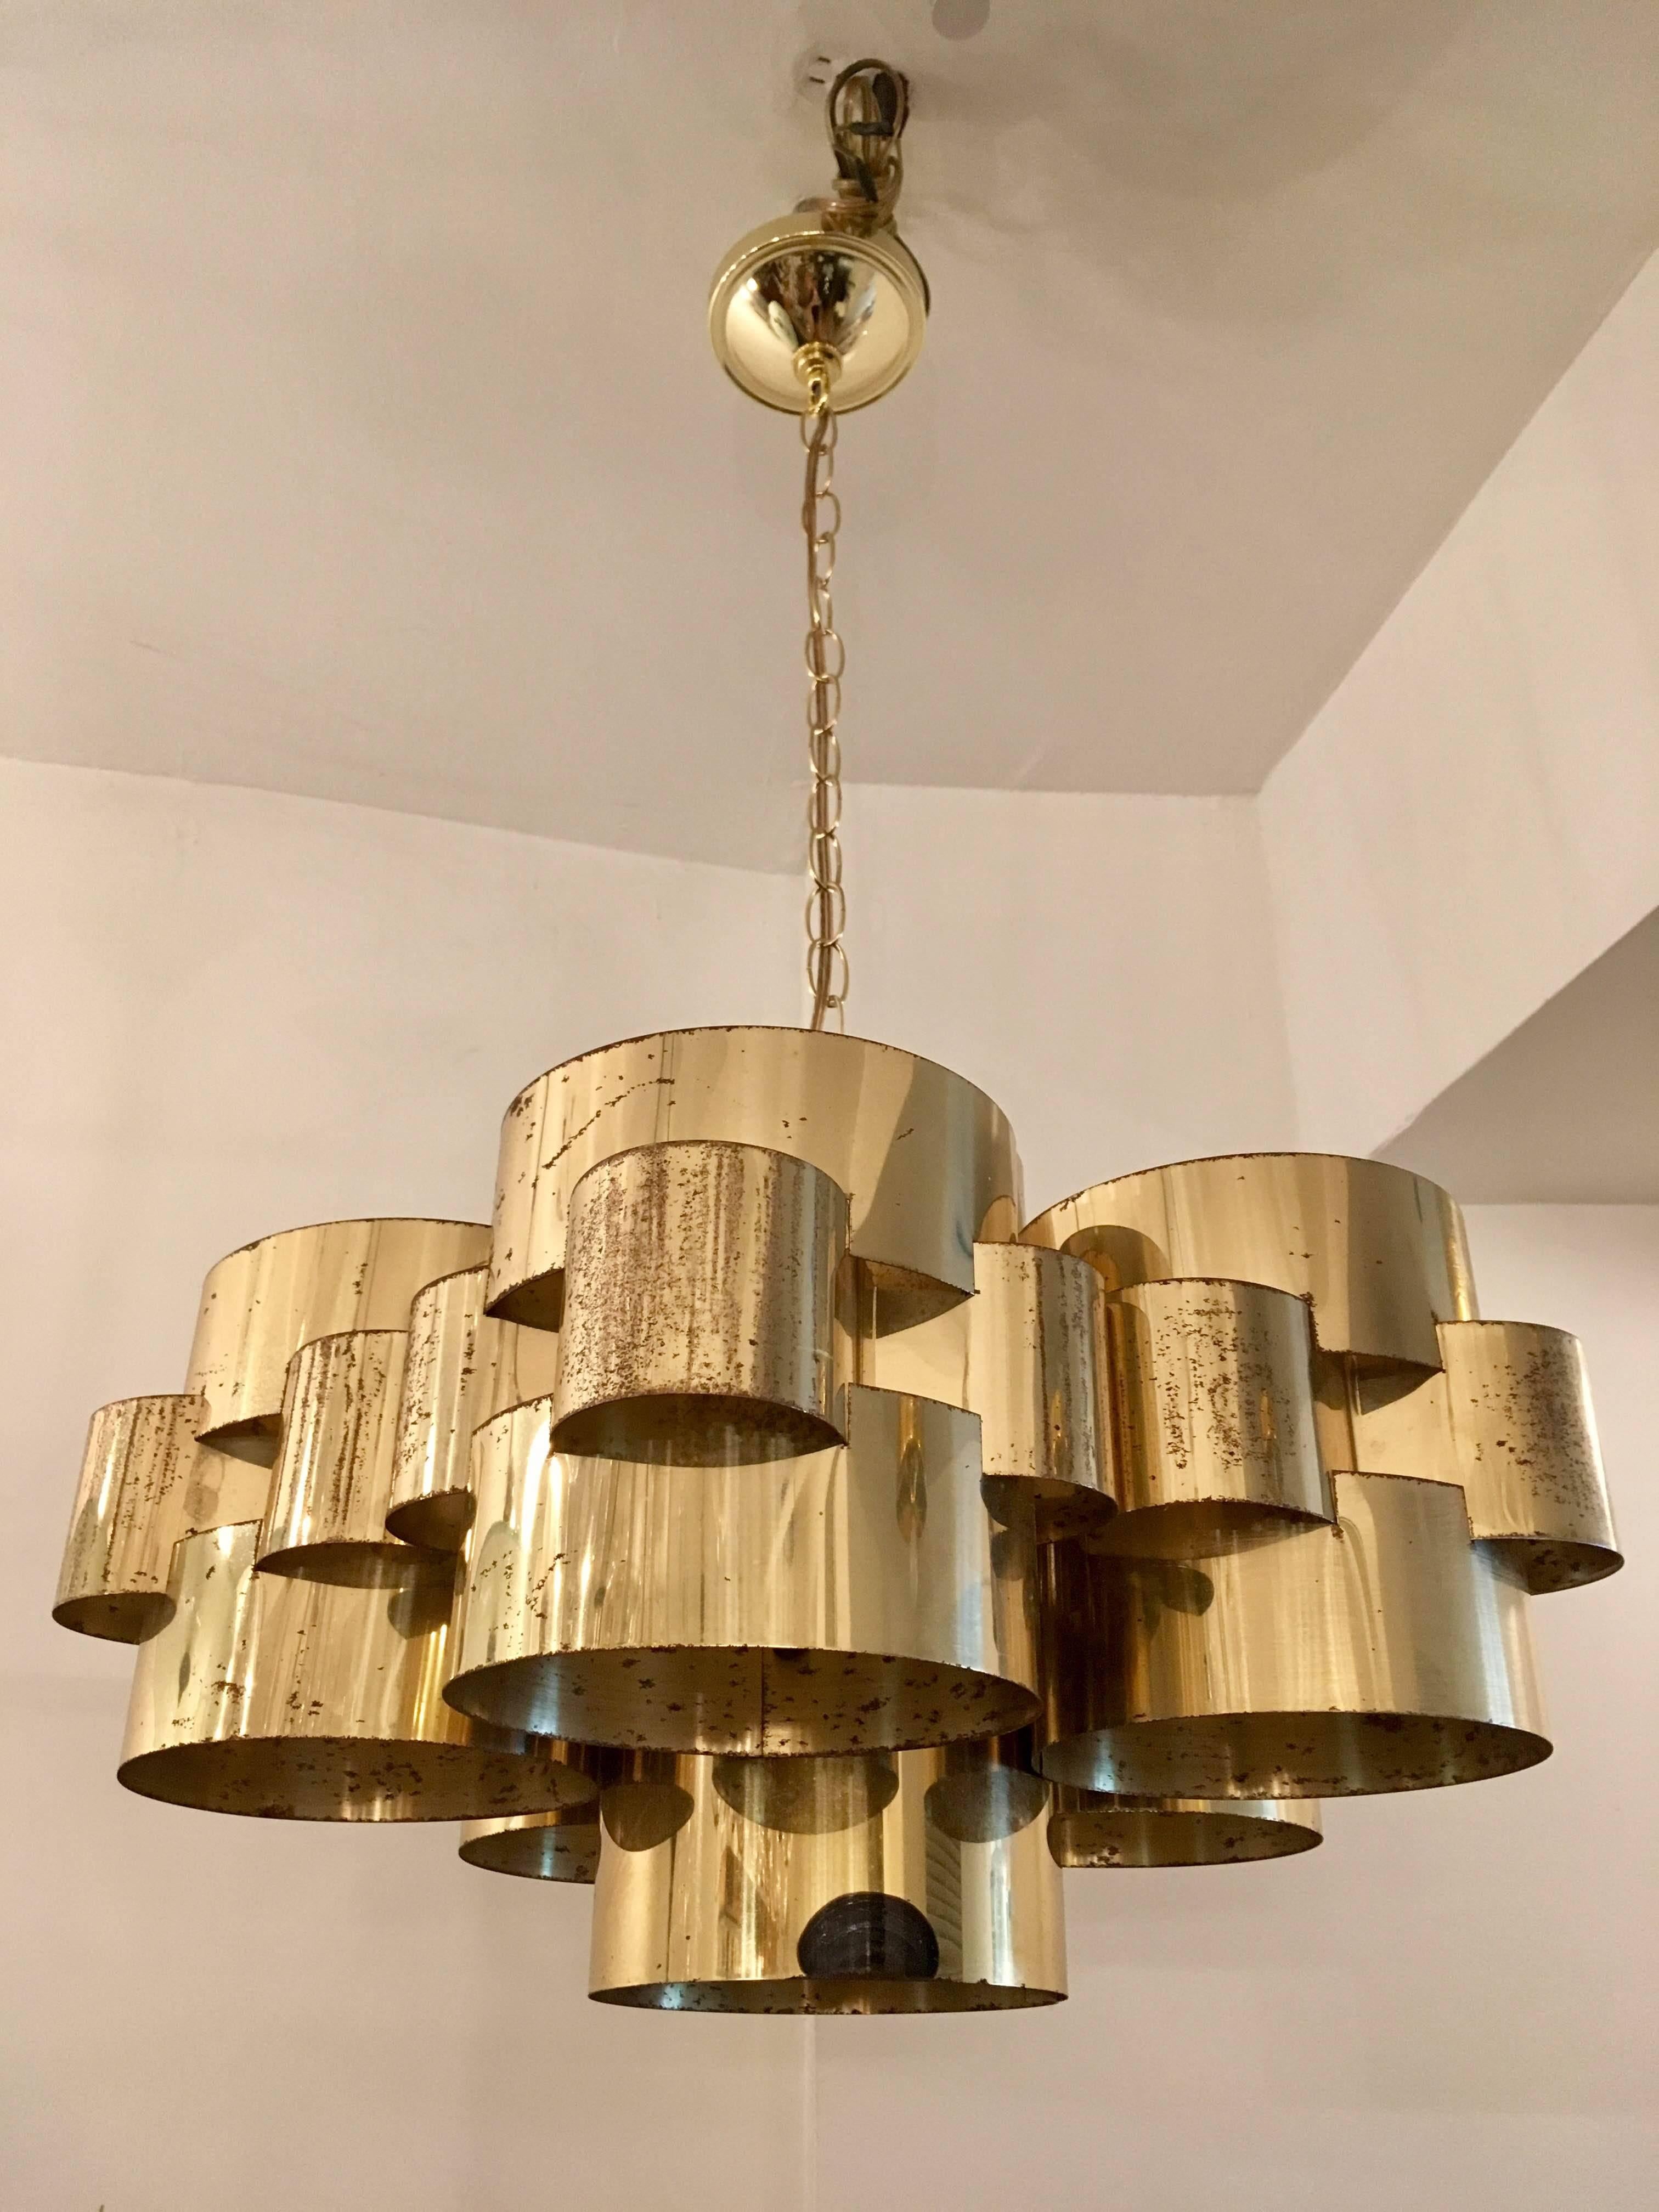 An original 1960s cloud pendant by Curtis Jere composed of circular polished brass components. Newly rewired. Original finish with pitting to the brass. We will include a new polish if desired. Signed.